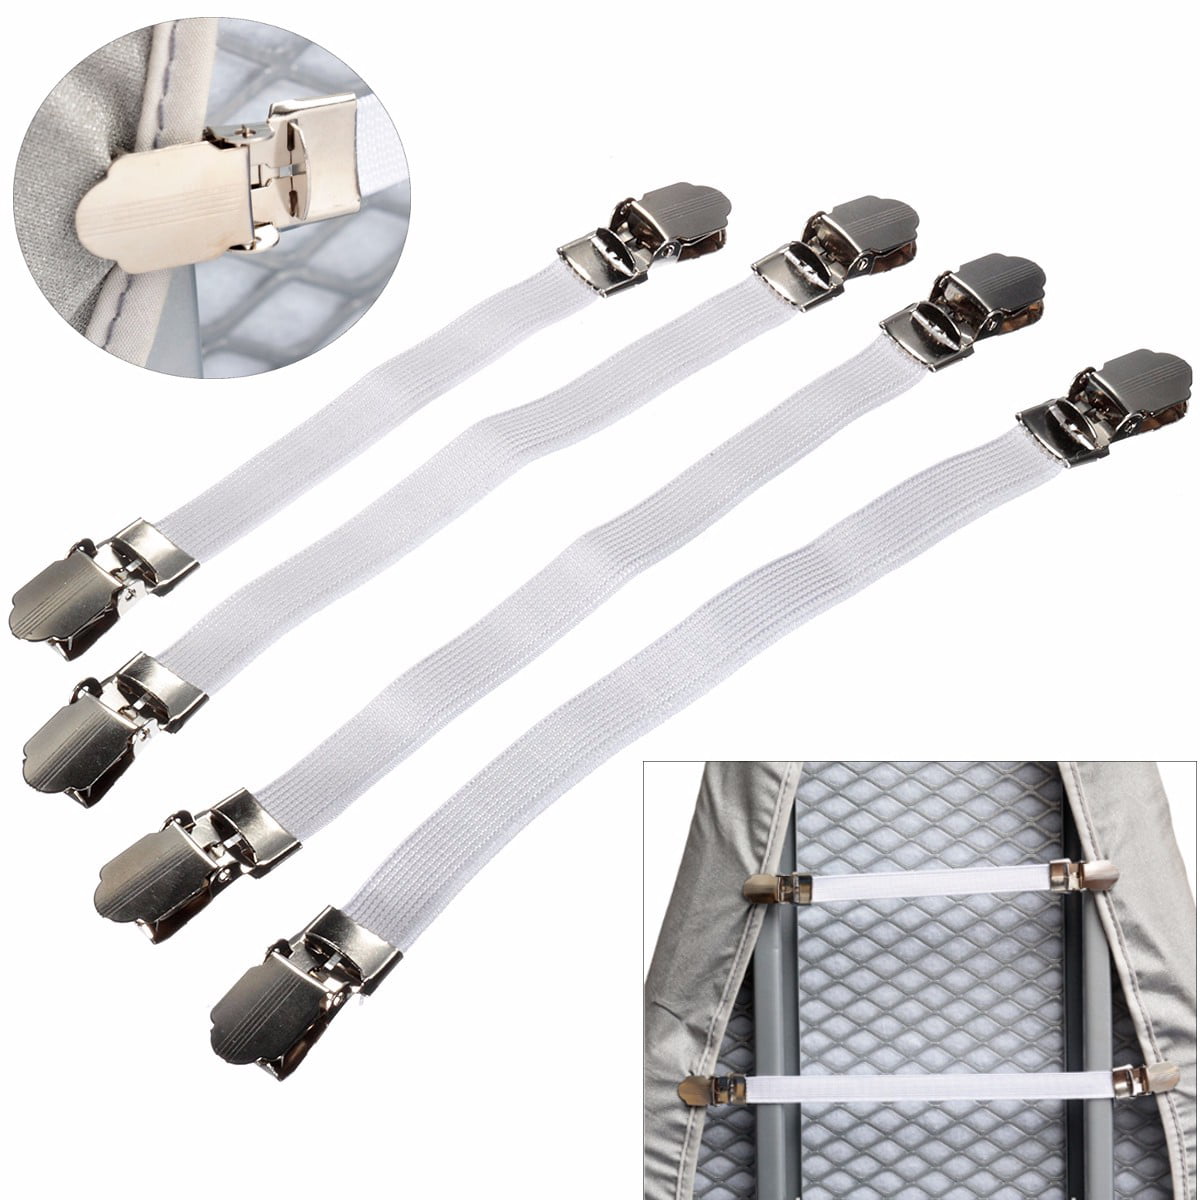 Withings 4PC IRONING BOARD COVER FASTENERS STRAPS ELASTICATED WITH METAL CLIPS NEW 